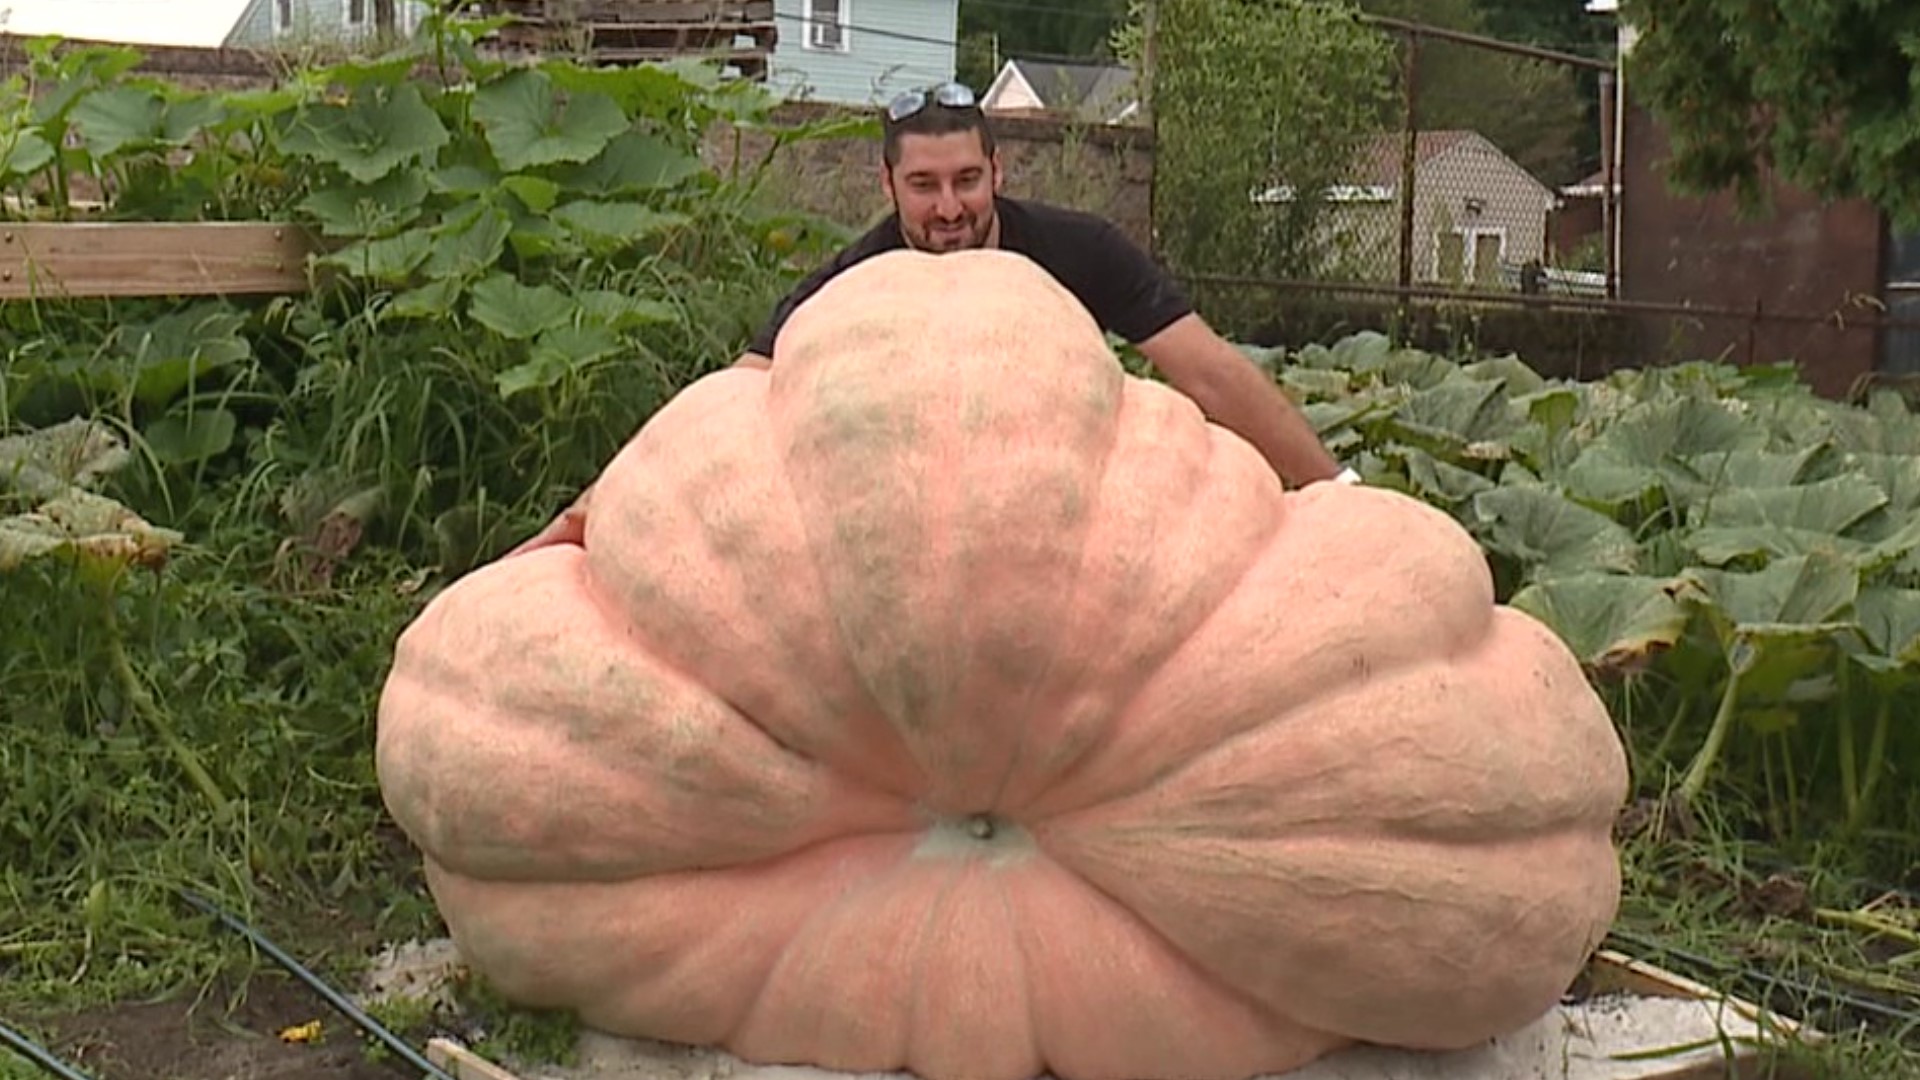 The great gourd weighing nearly 2,000 pounds will soon be picked and sold.